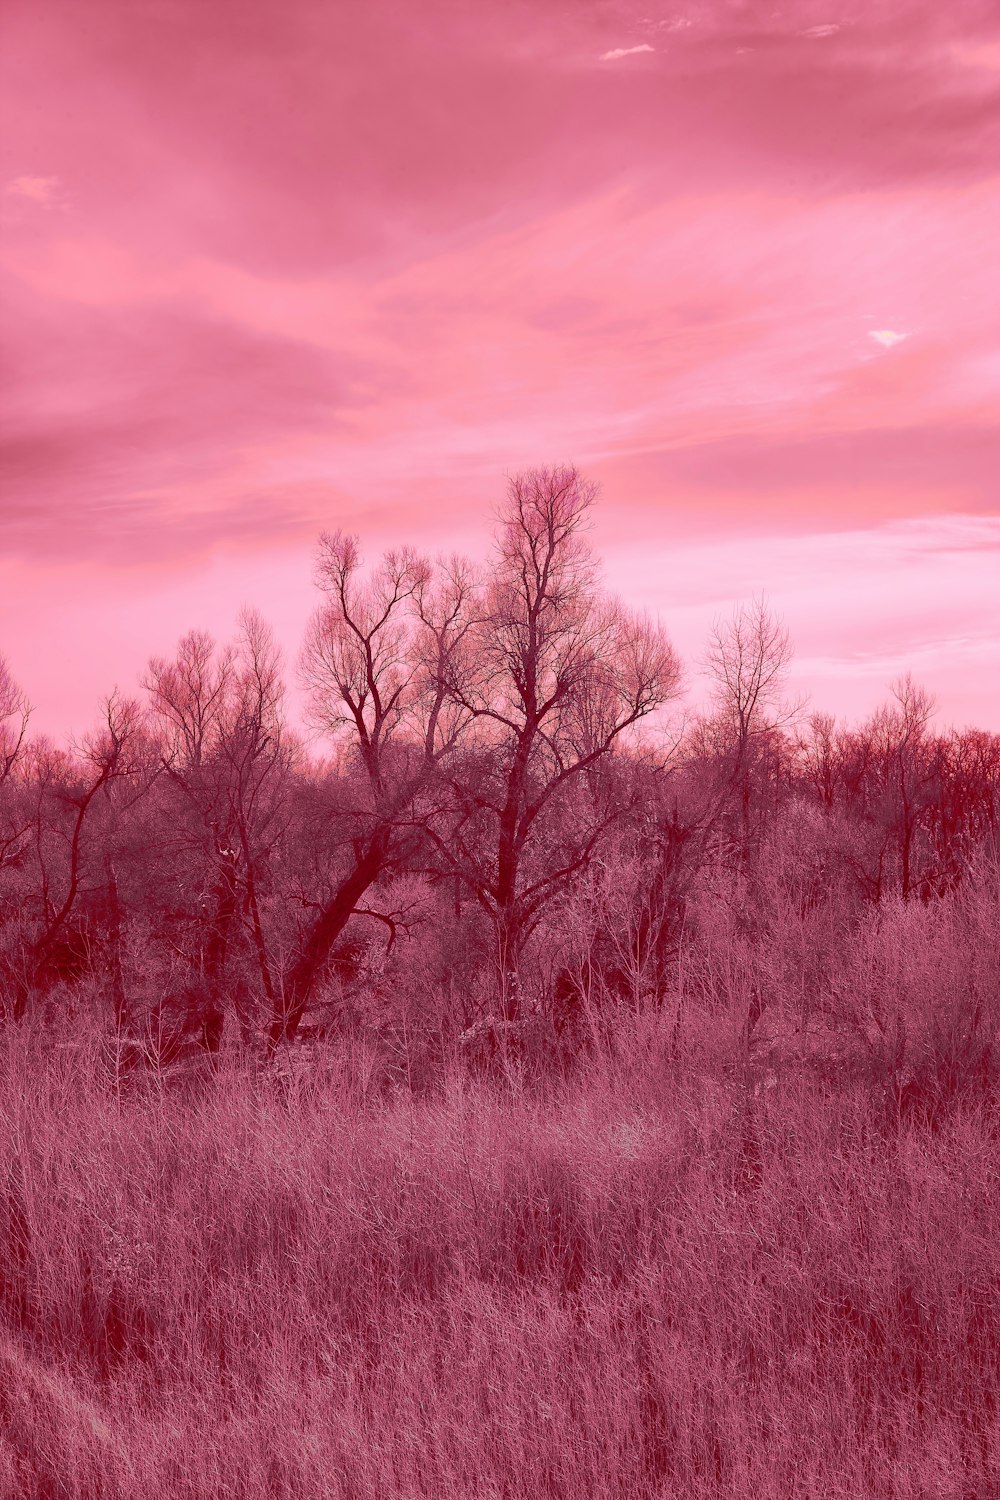 a pink sky with some trees in the foreground